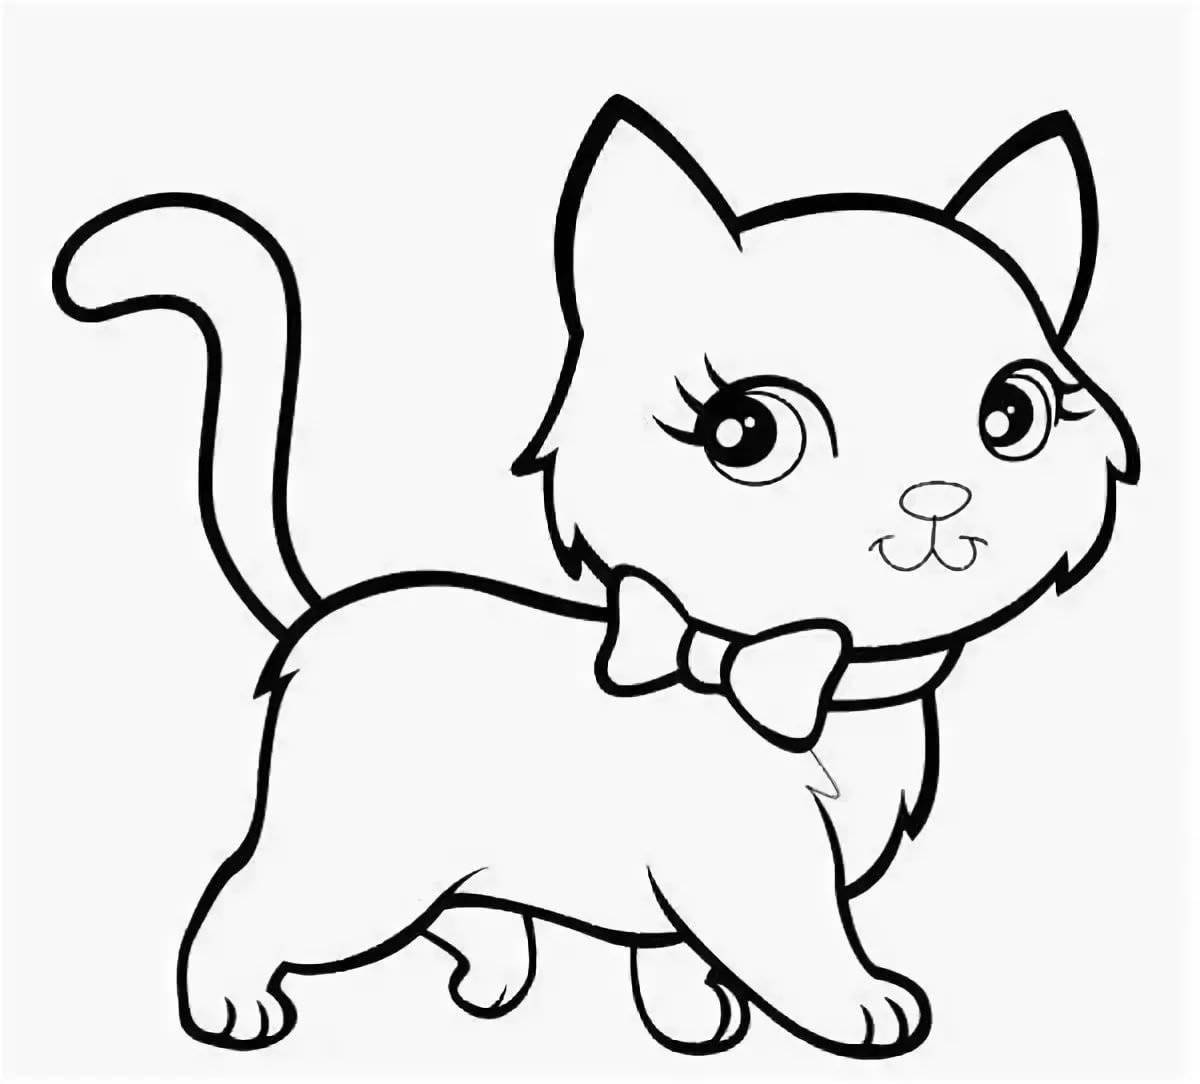 Cute cat coloring pages for girls